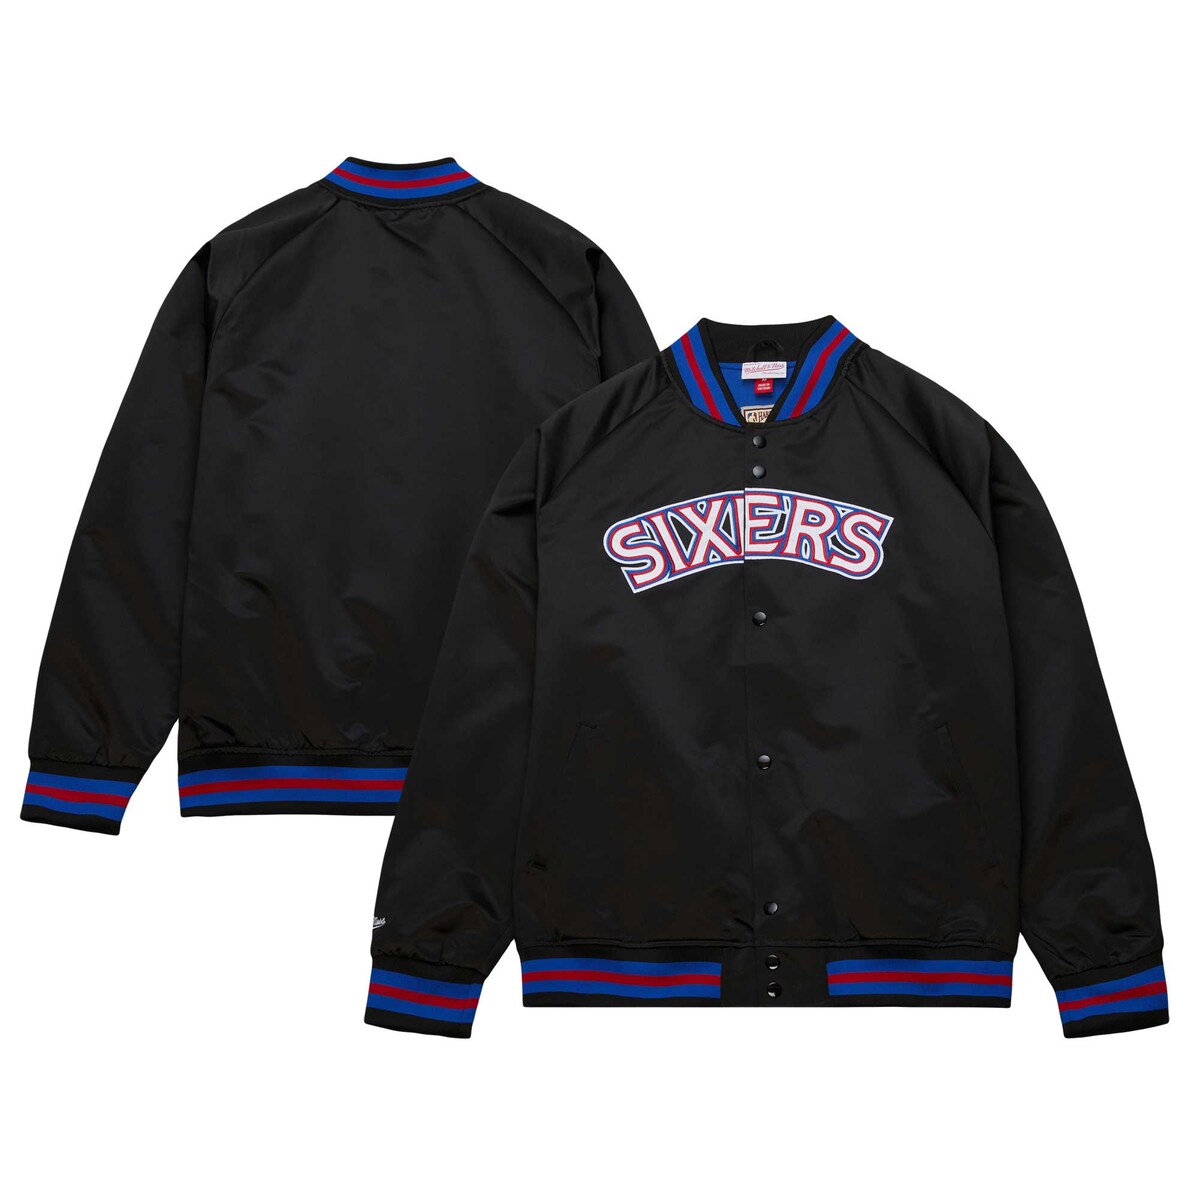 Throwback to the past with this comfortable Mitchell & Ness Wordmark full-snap jacket dedicated to the Philadelphia 76ers. Featuring raglan sleeves and instantly recognizable Philadelphia 76ers graphics and colors, this stunning piece of gear won't sit in your closet for long. As soon as cooler weather arrives, you'll be sporting this snazzy jacket.Midweight jacket suitable for moderate temperaturesMaterial: 100% Polyester - Body; 65% Polyester/35% Cotton - LiningTwo front pocketsLocker loopBrand: Mitchell & NessOfficially licensedFull SnapRaglan sleevesLong sleeveImportedOne interior pocketRib-knit collar, cuffs, and waistbandLinedStand up collarEmbroidered fabric appliqueMachine wash, tumble dry low